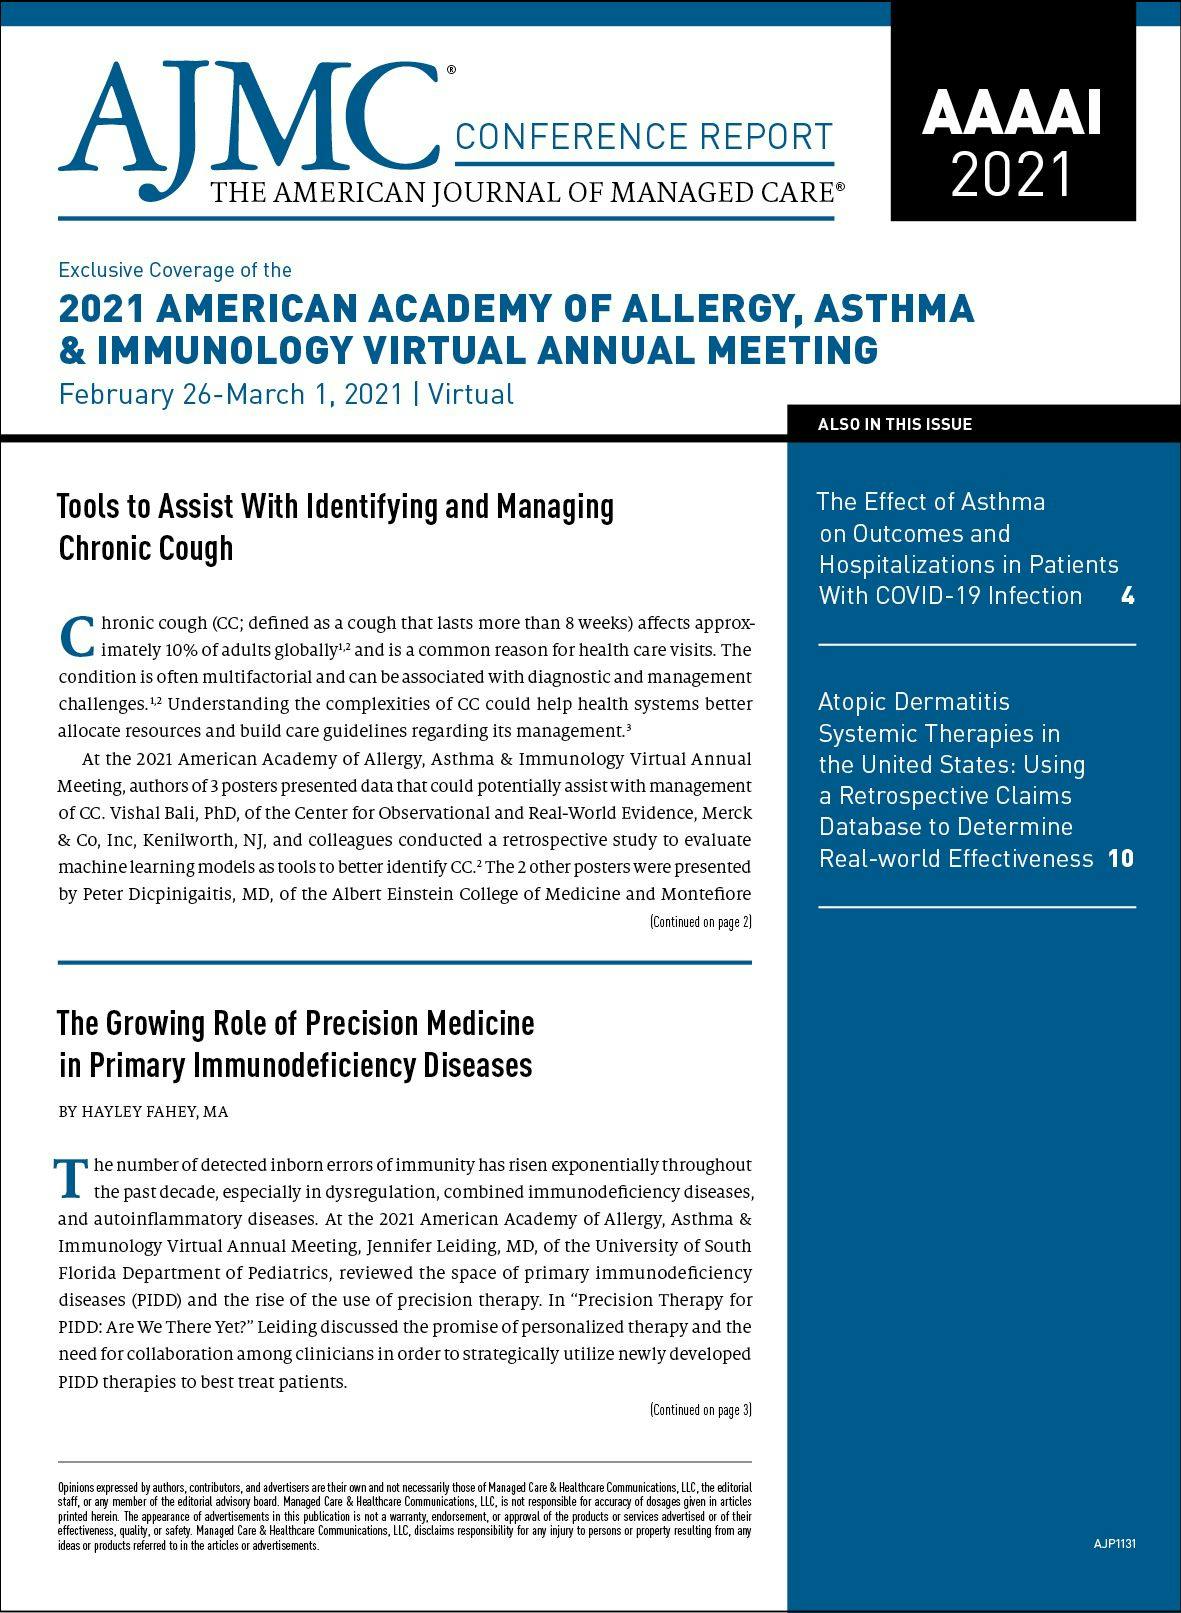 Exclusive Coverage of the 2021 American Academy of Allergy, Asthma & Immunology Virtual Annual Meeting